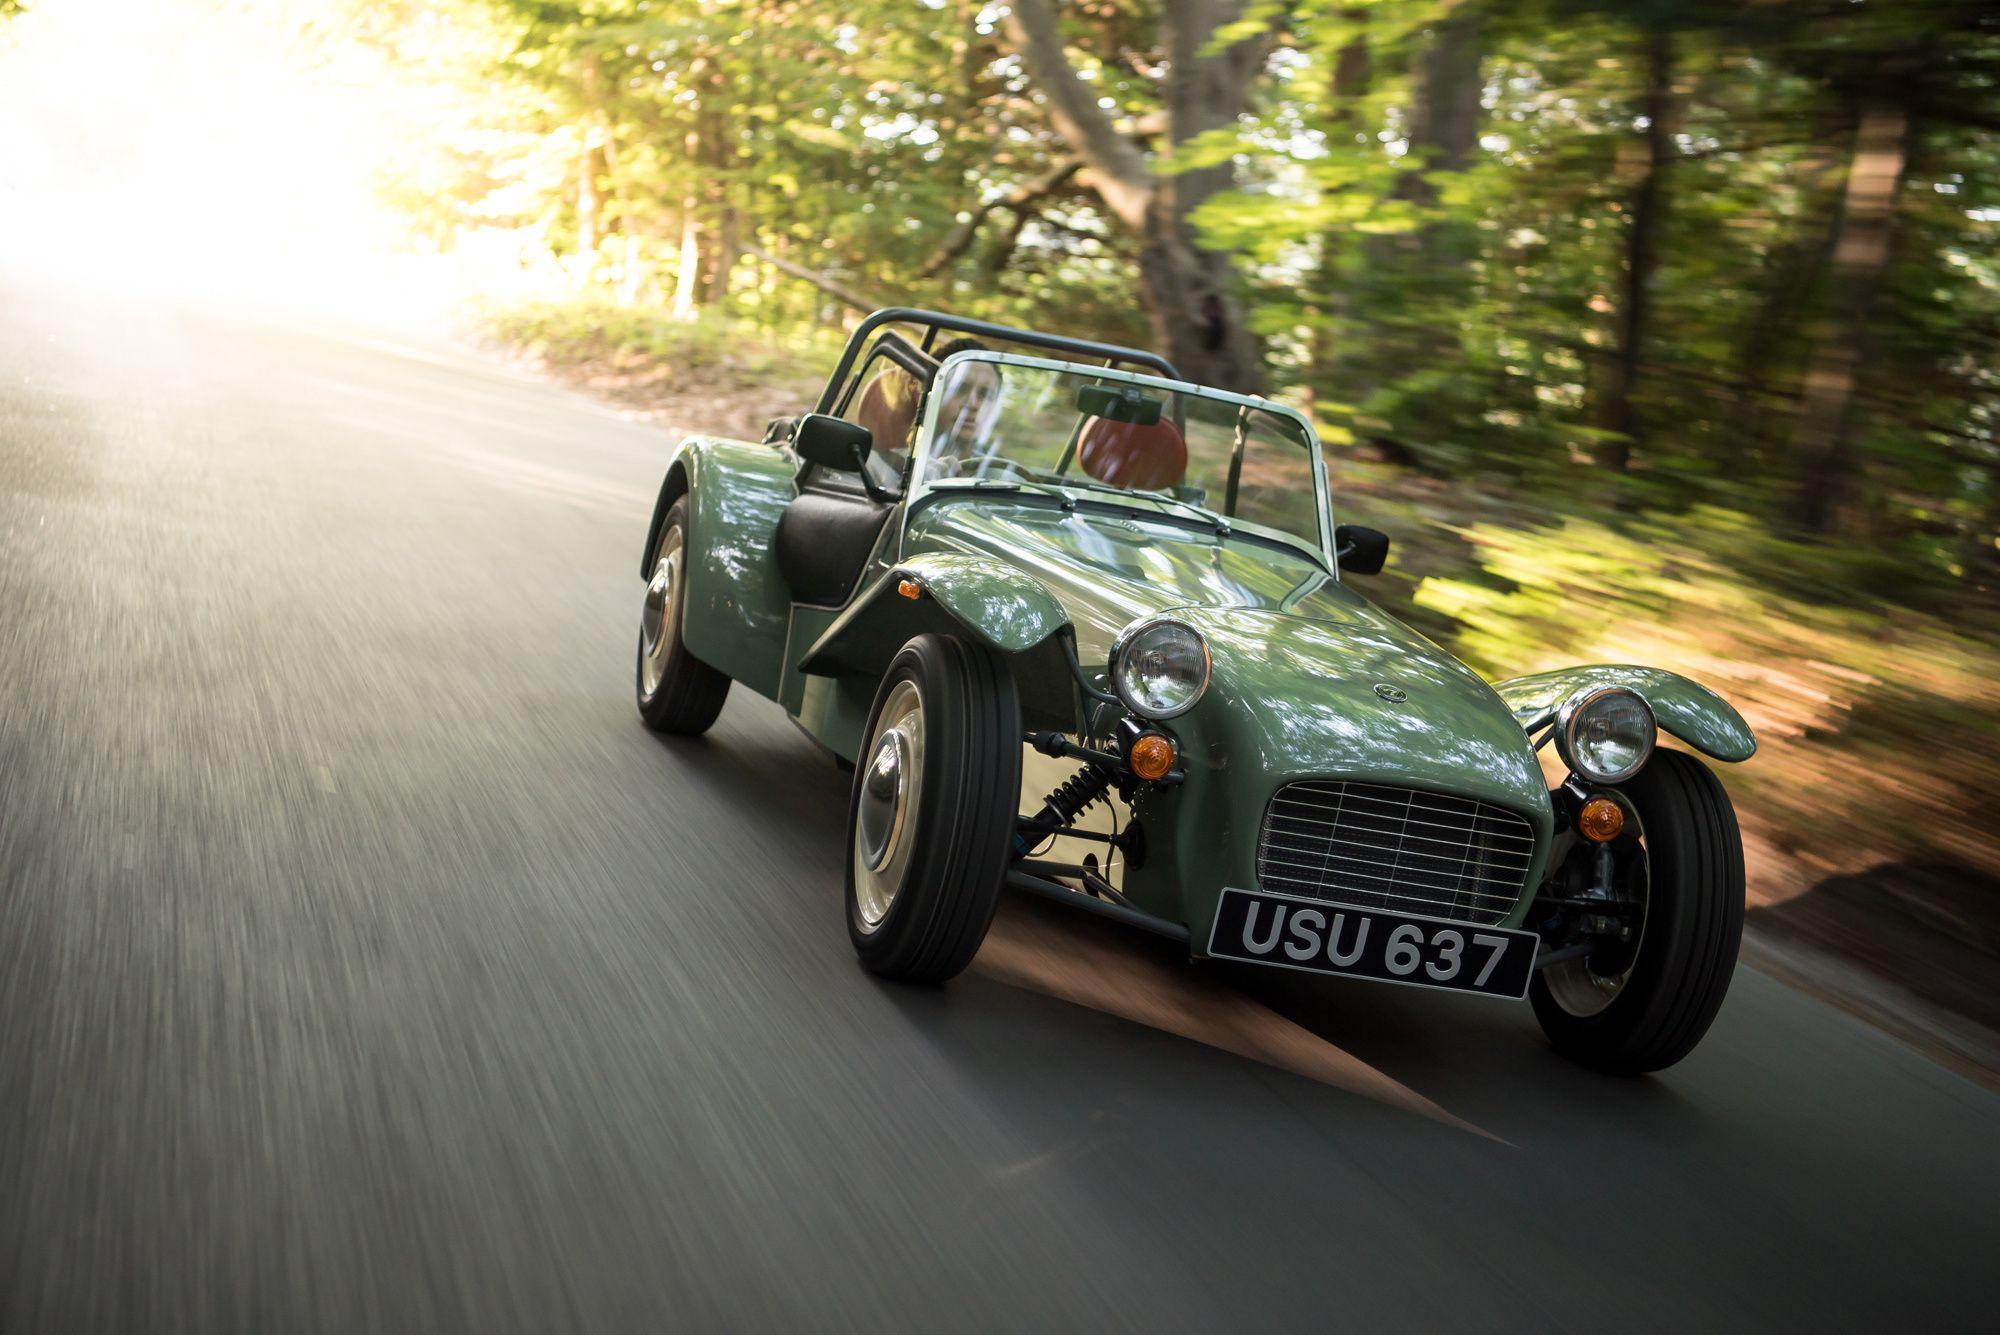 Caterham Seven Sprint Wallpaper Image Photo Picture Background